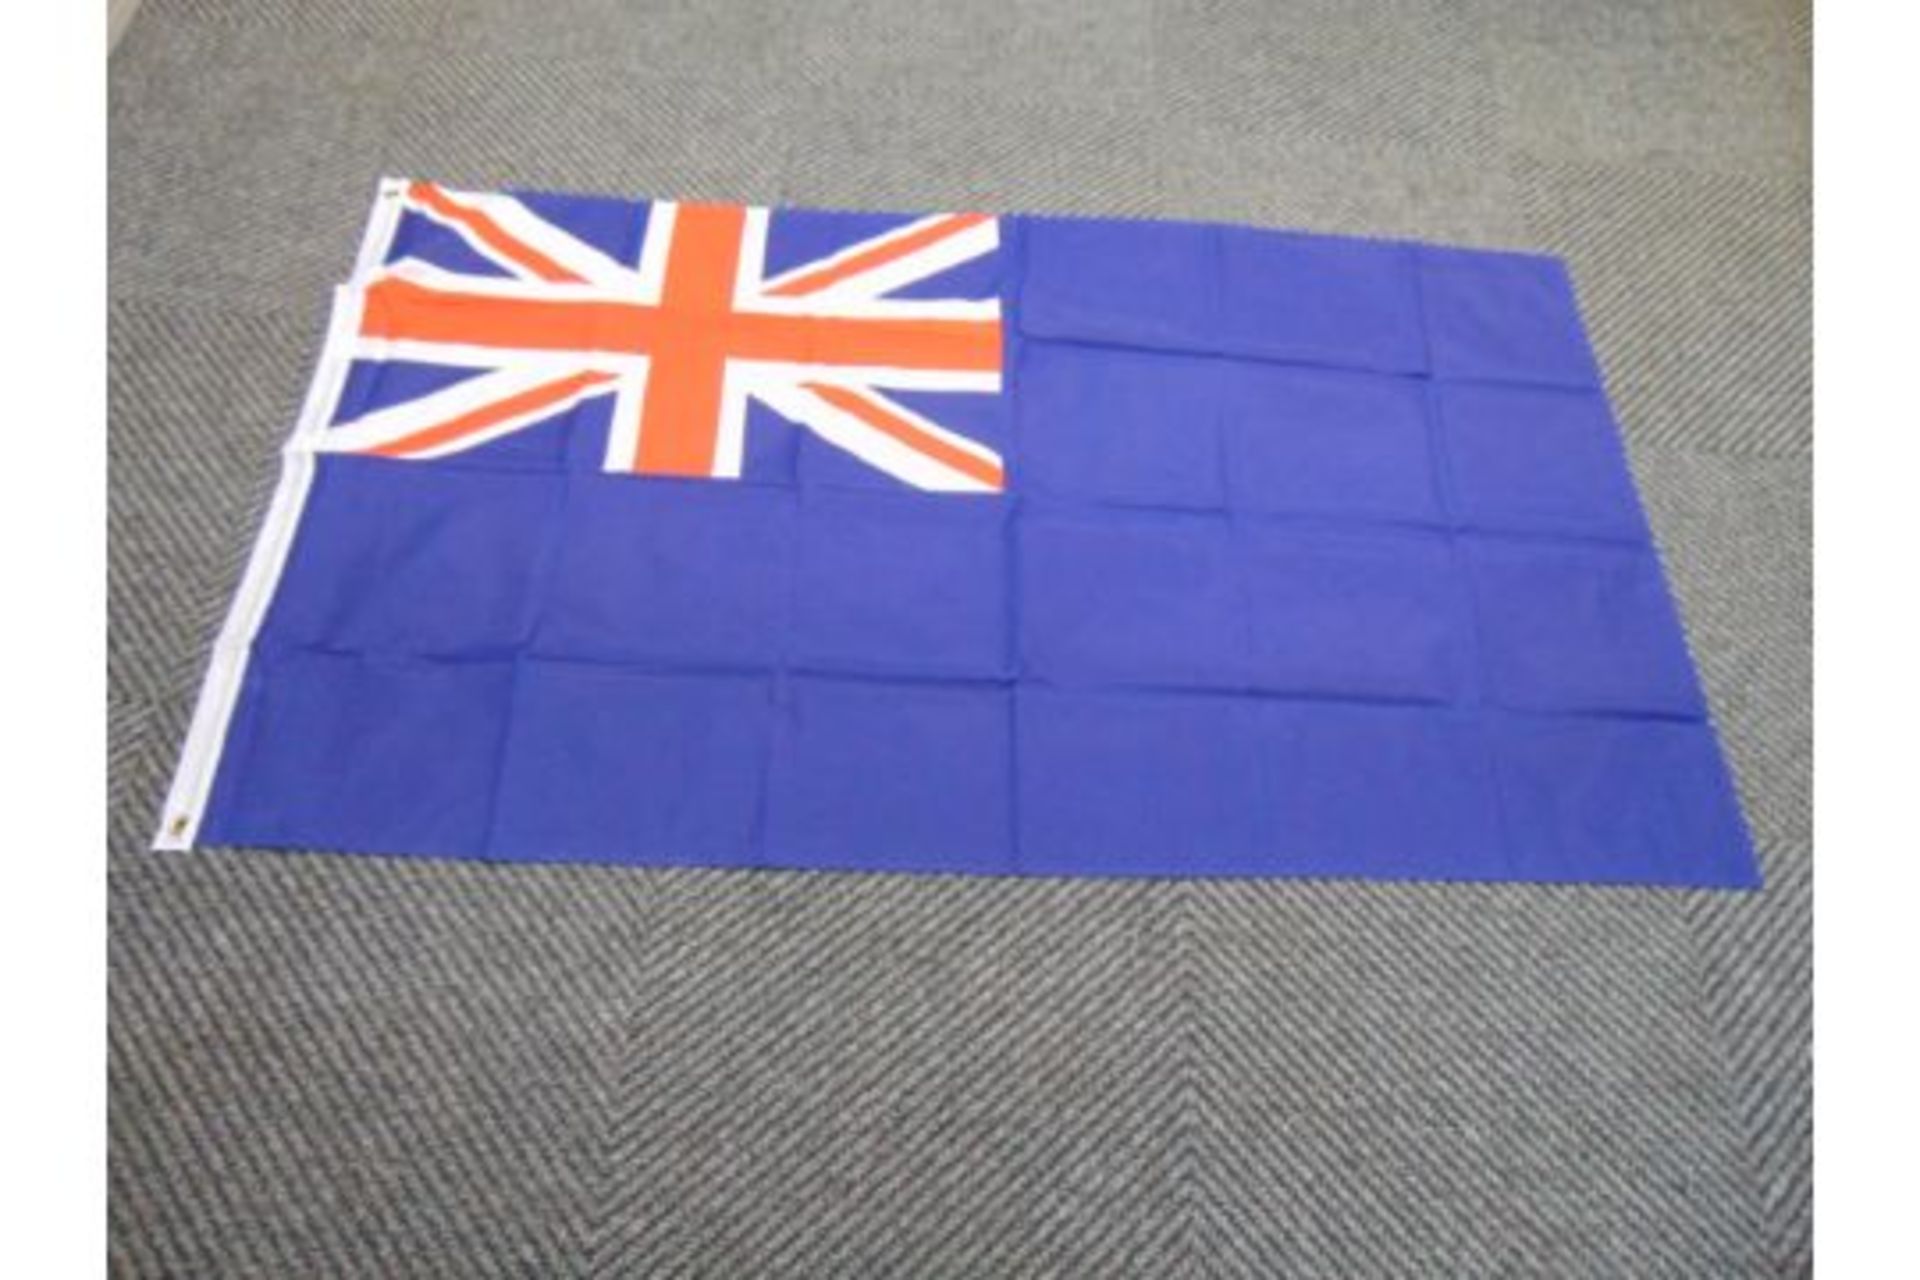 Blue Ensign Flag - 5ft x 3ft with Metal Eyelets. - Image 2 of 5